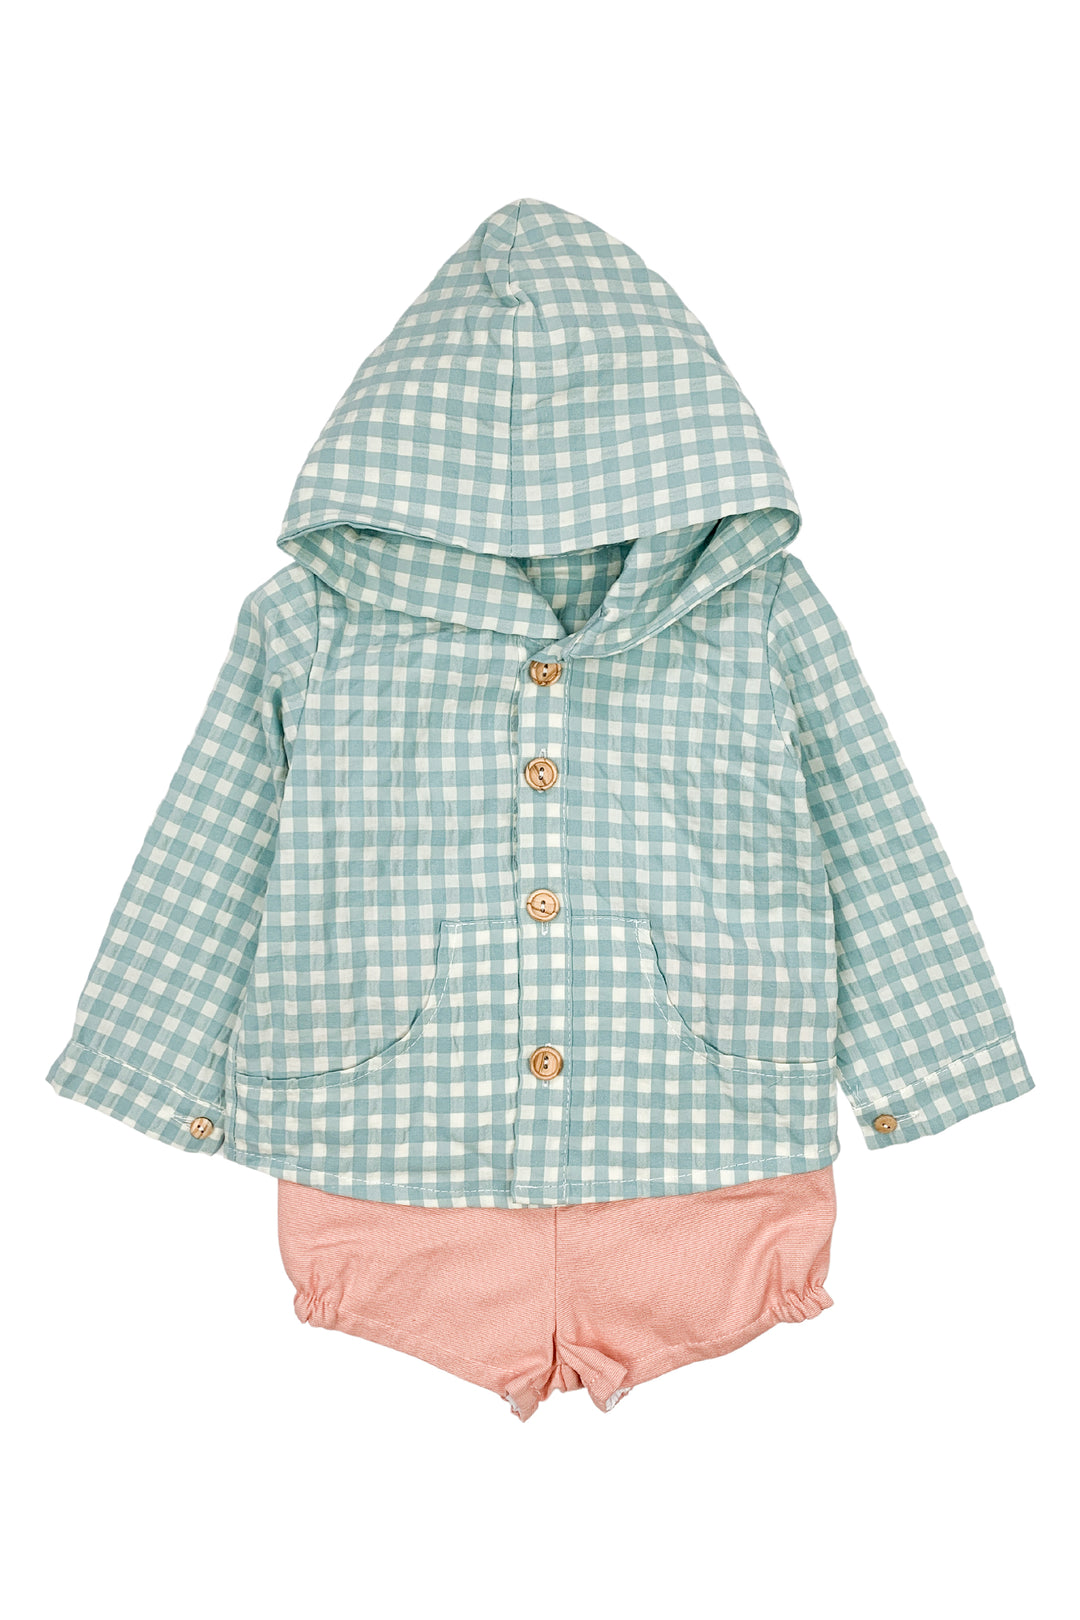 Valentina Bebes "Wolf" Sage Green Gingham Hoodie & Shorts | Millie and John